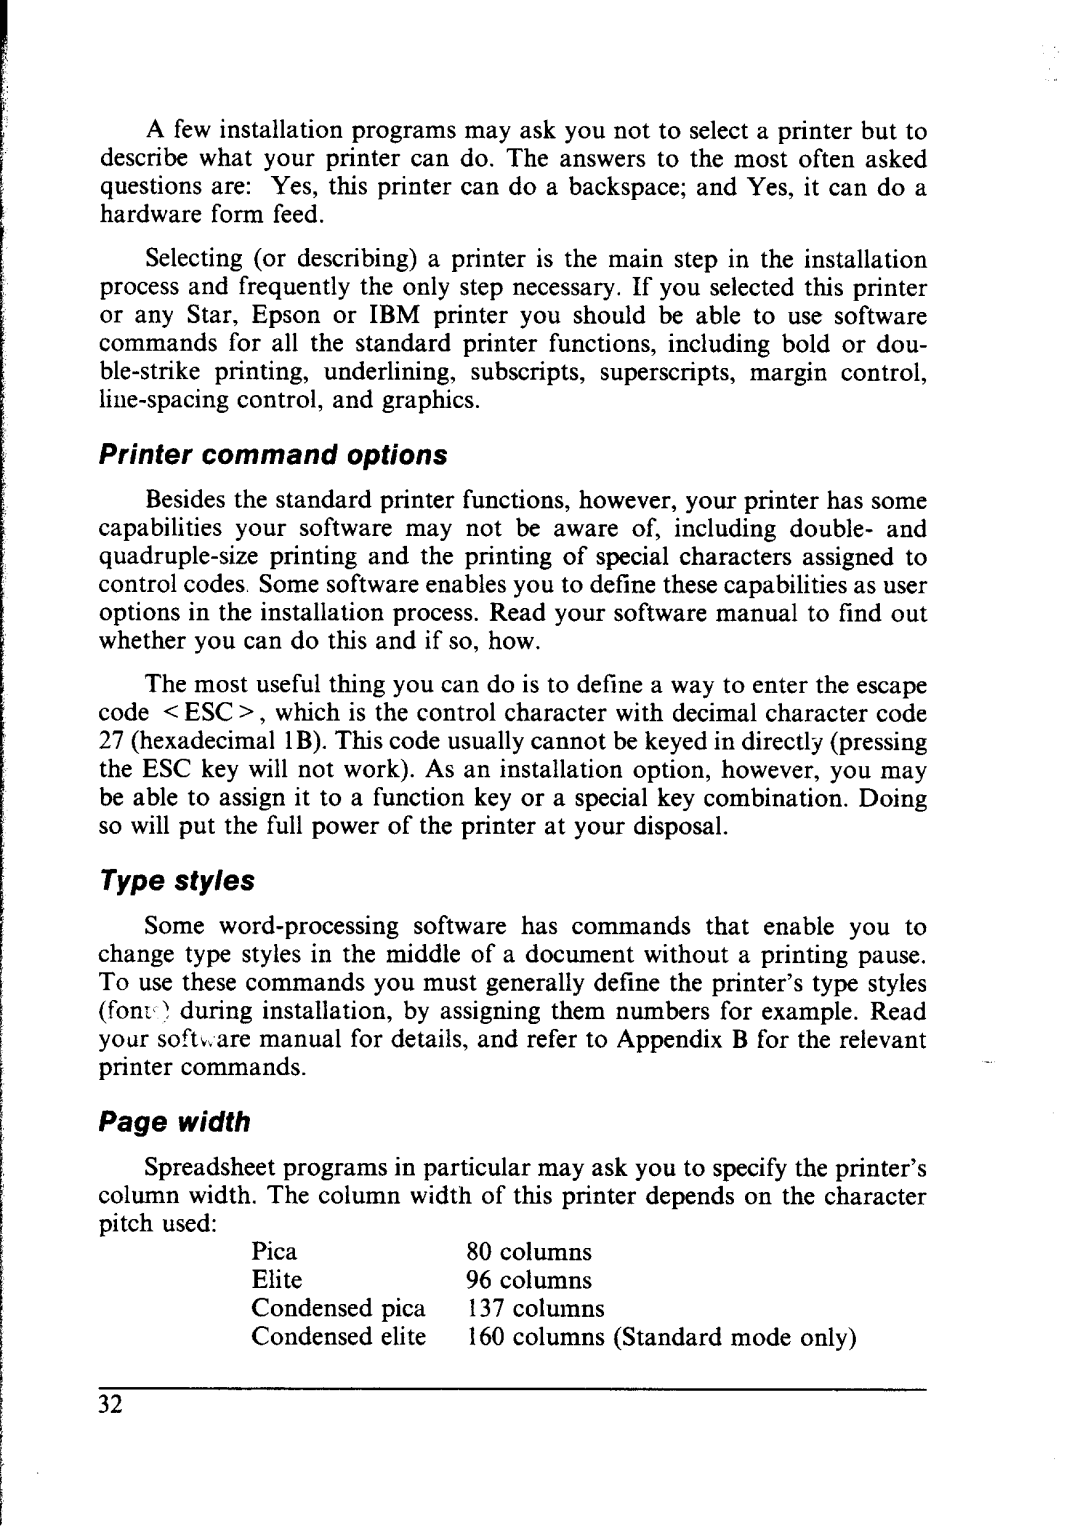 Star Micronics NX-1000 manual Printer command options, Type styles, Page width 